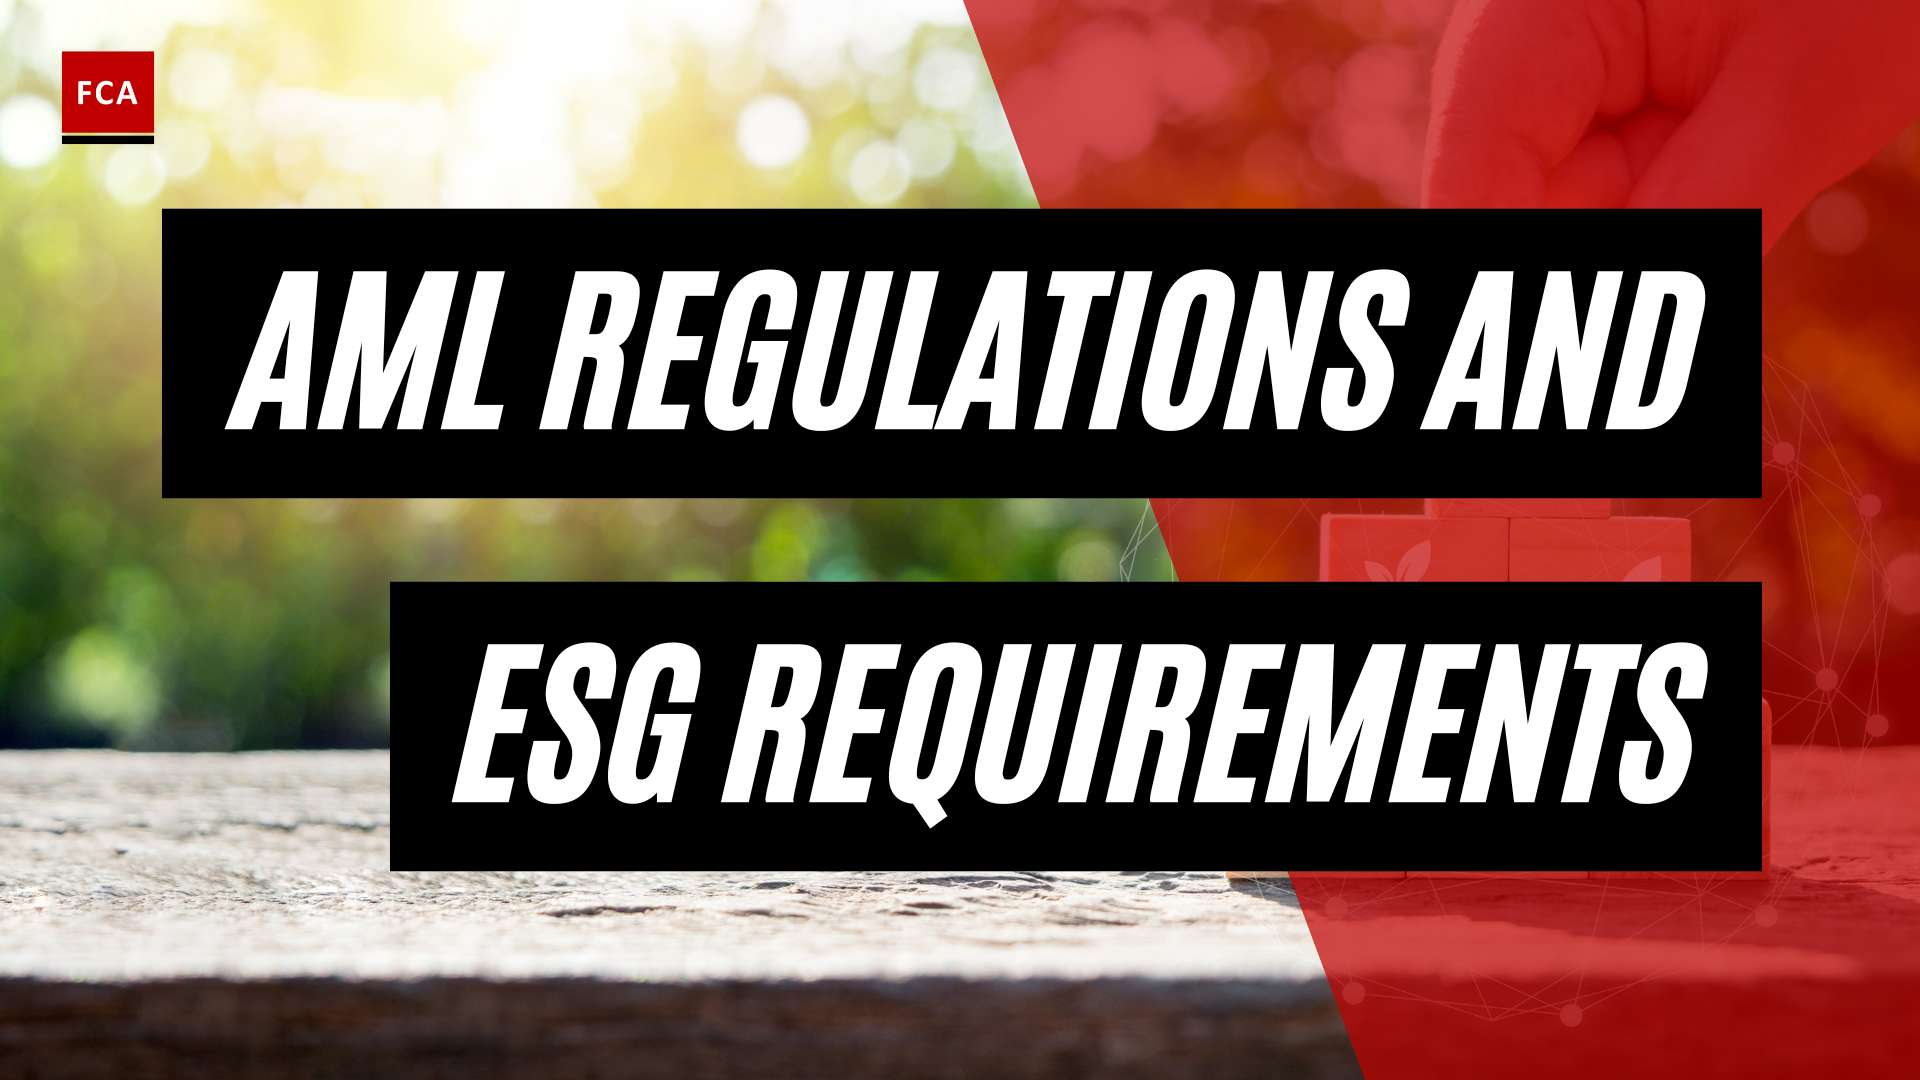 Bridging The Gap: Aml Regulations And Esg Requirements In Harmony